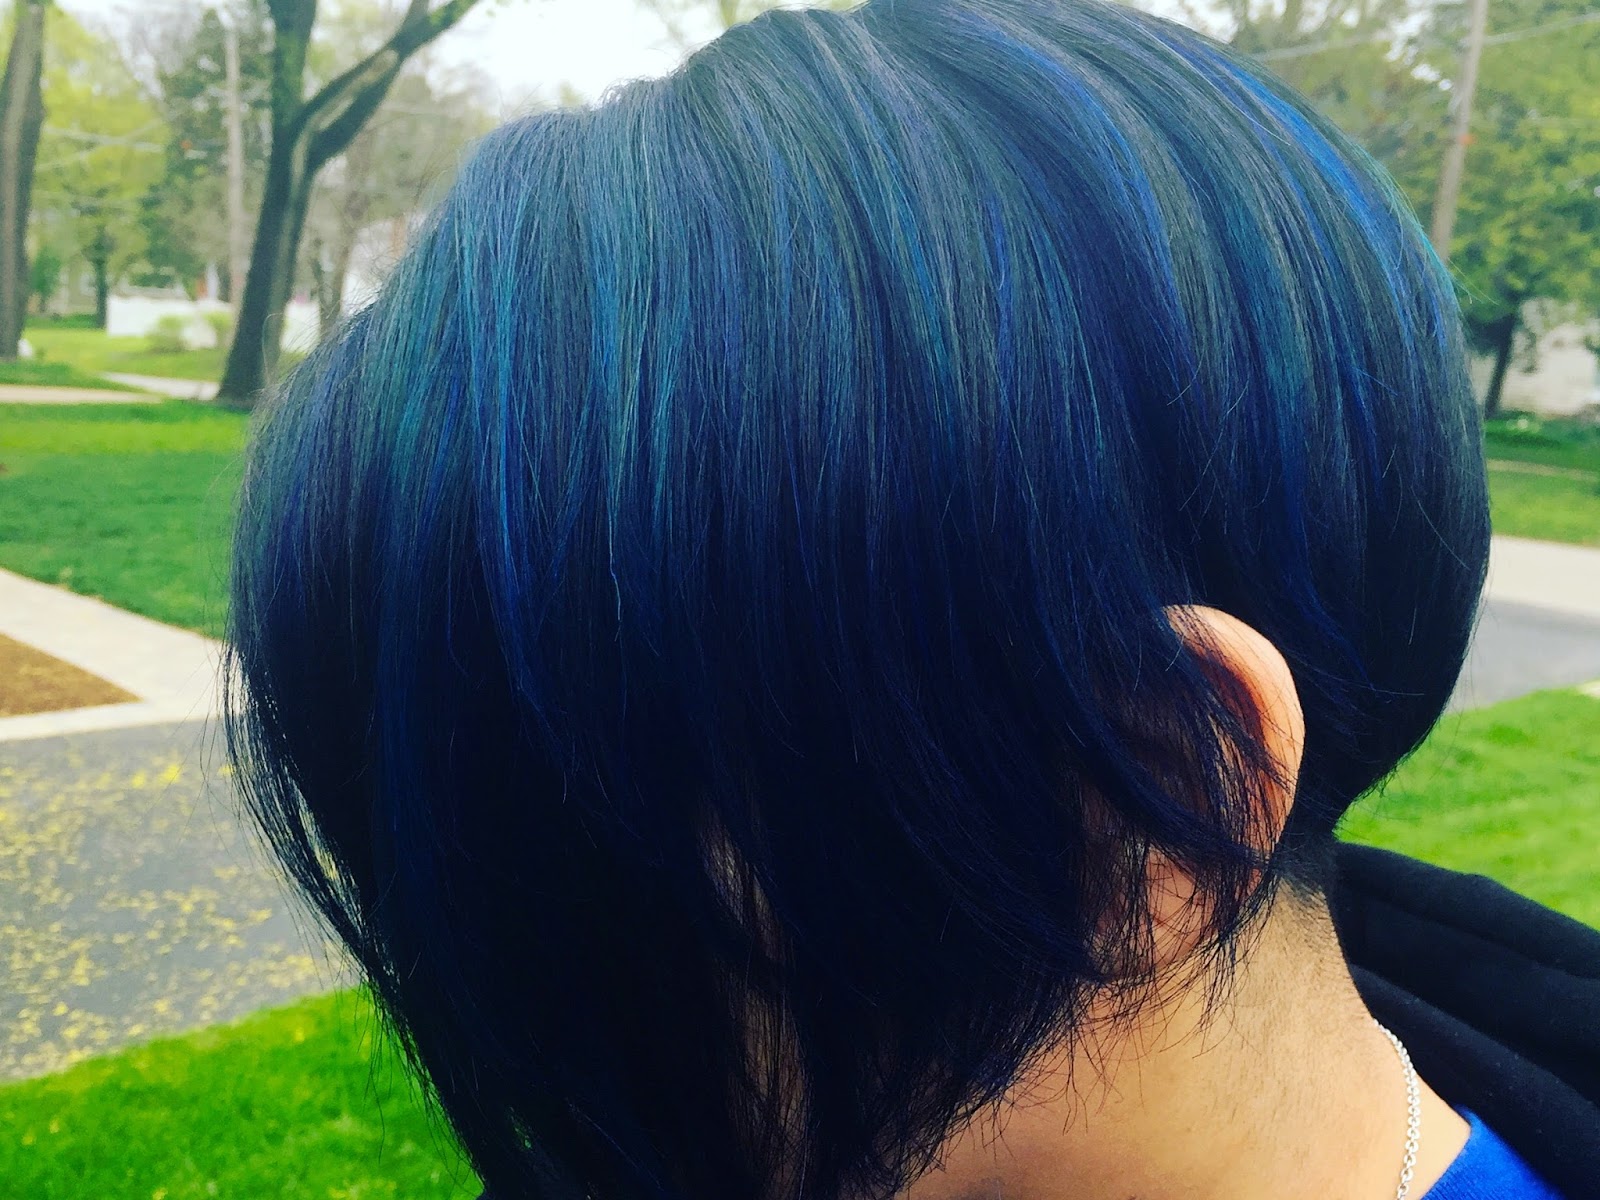 2. "How to Achieve Burgundy and Blue Hair" - wide 8